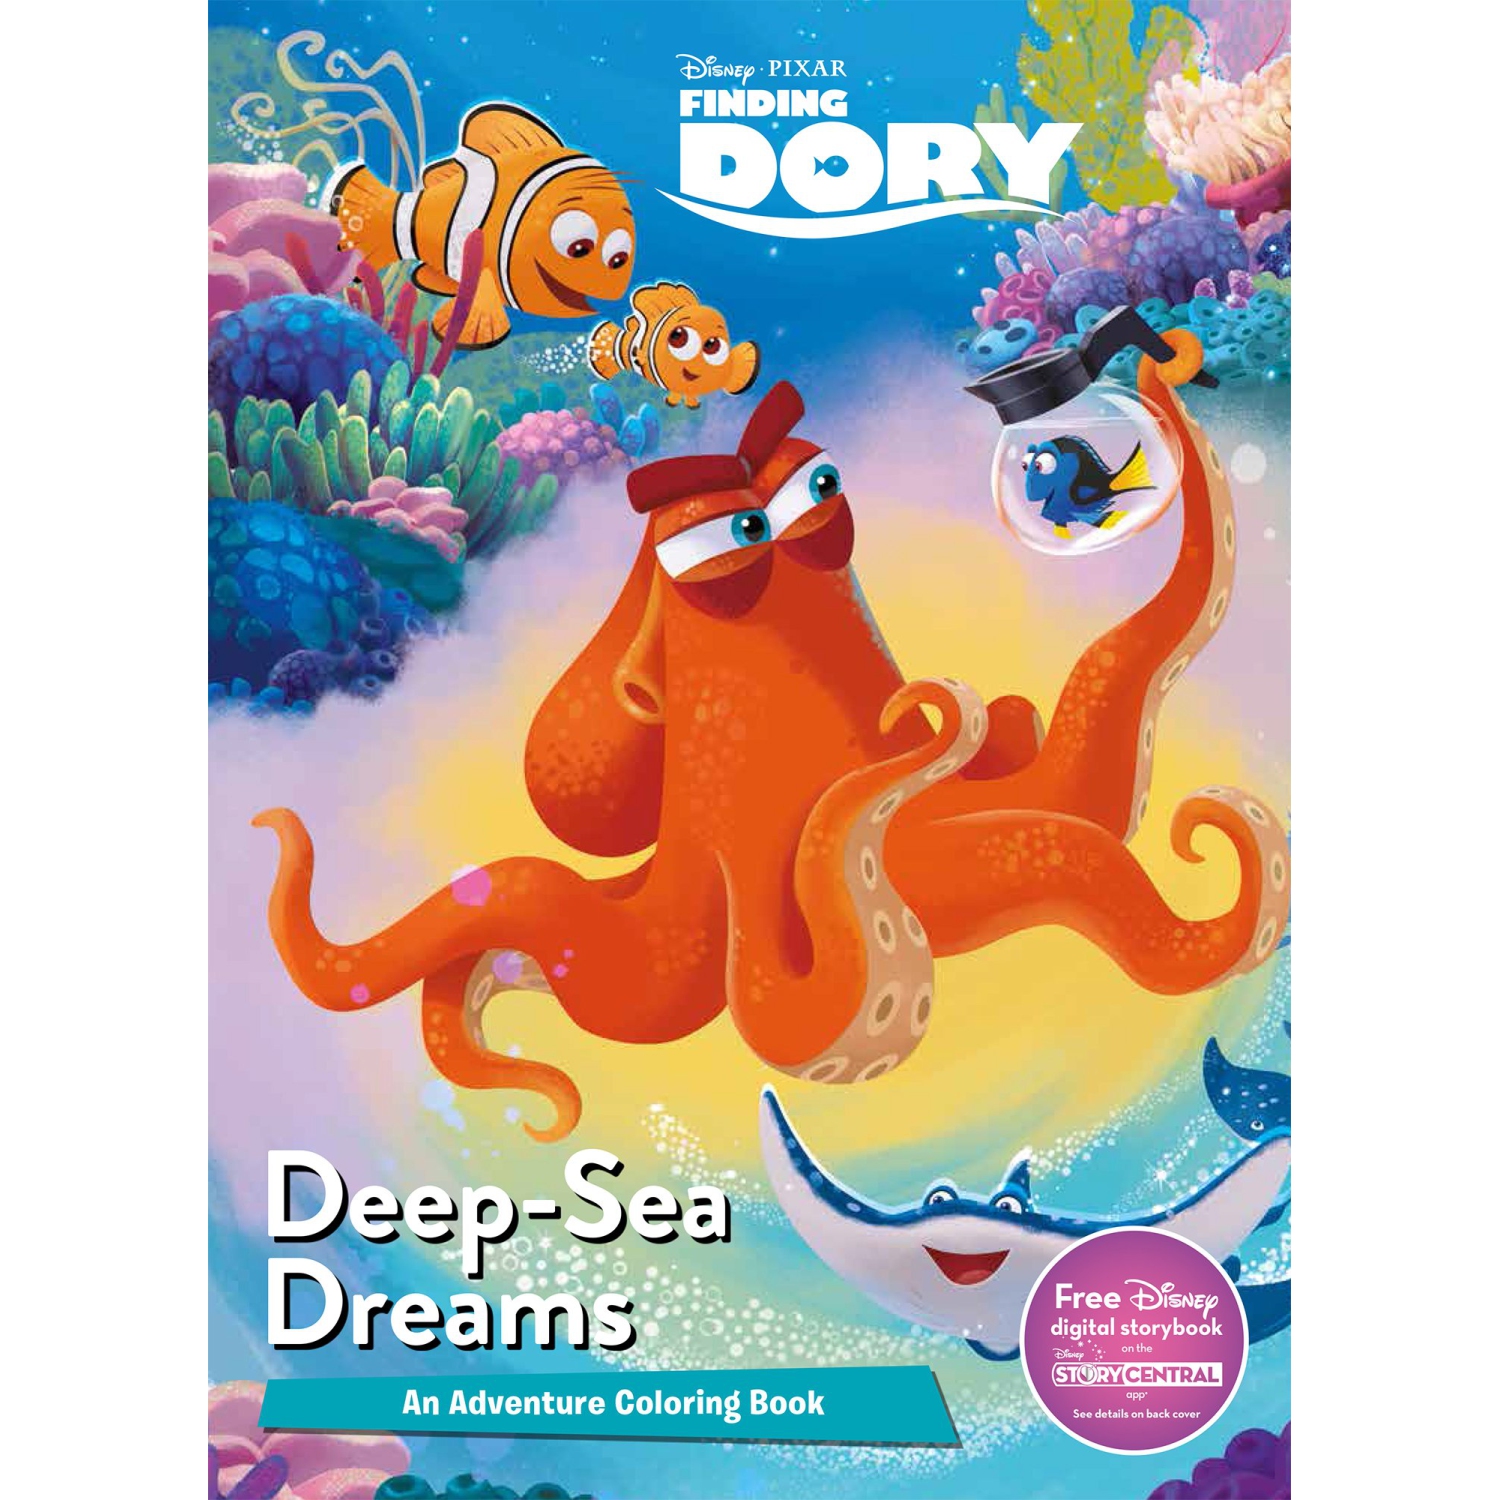 watch finding dory online free mega